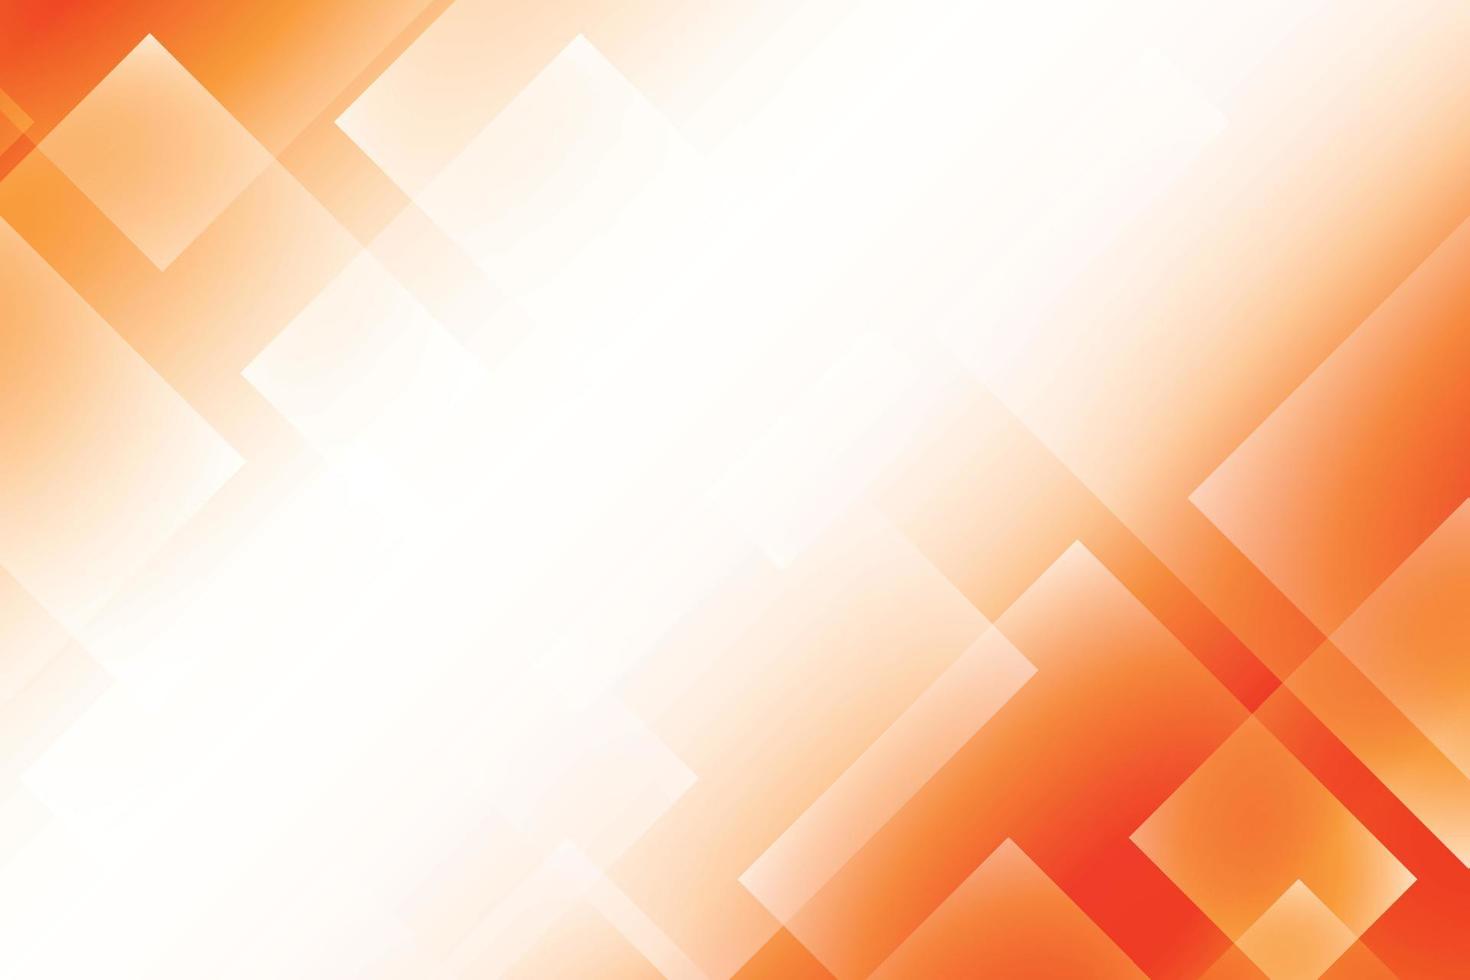 Abstract orange and white color background with geometric rectangle shape. Vector illustration.